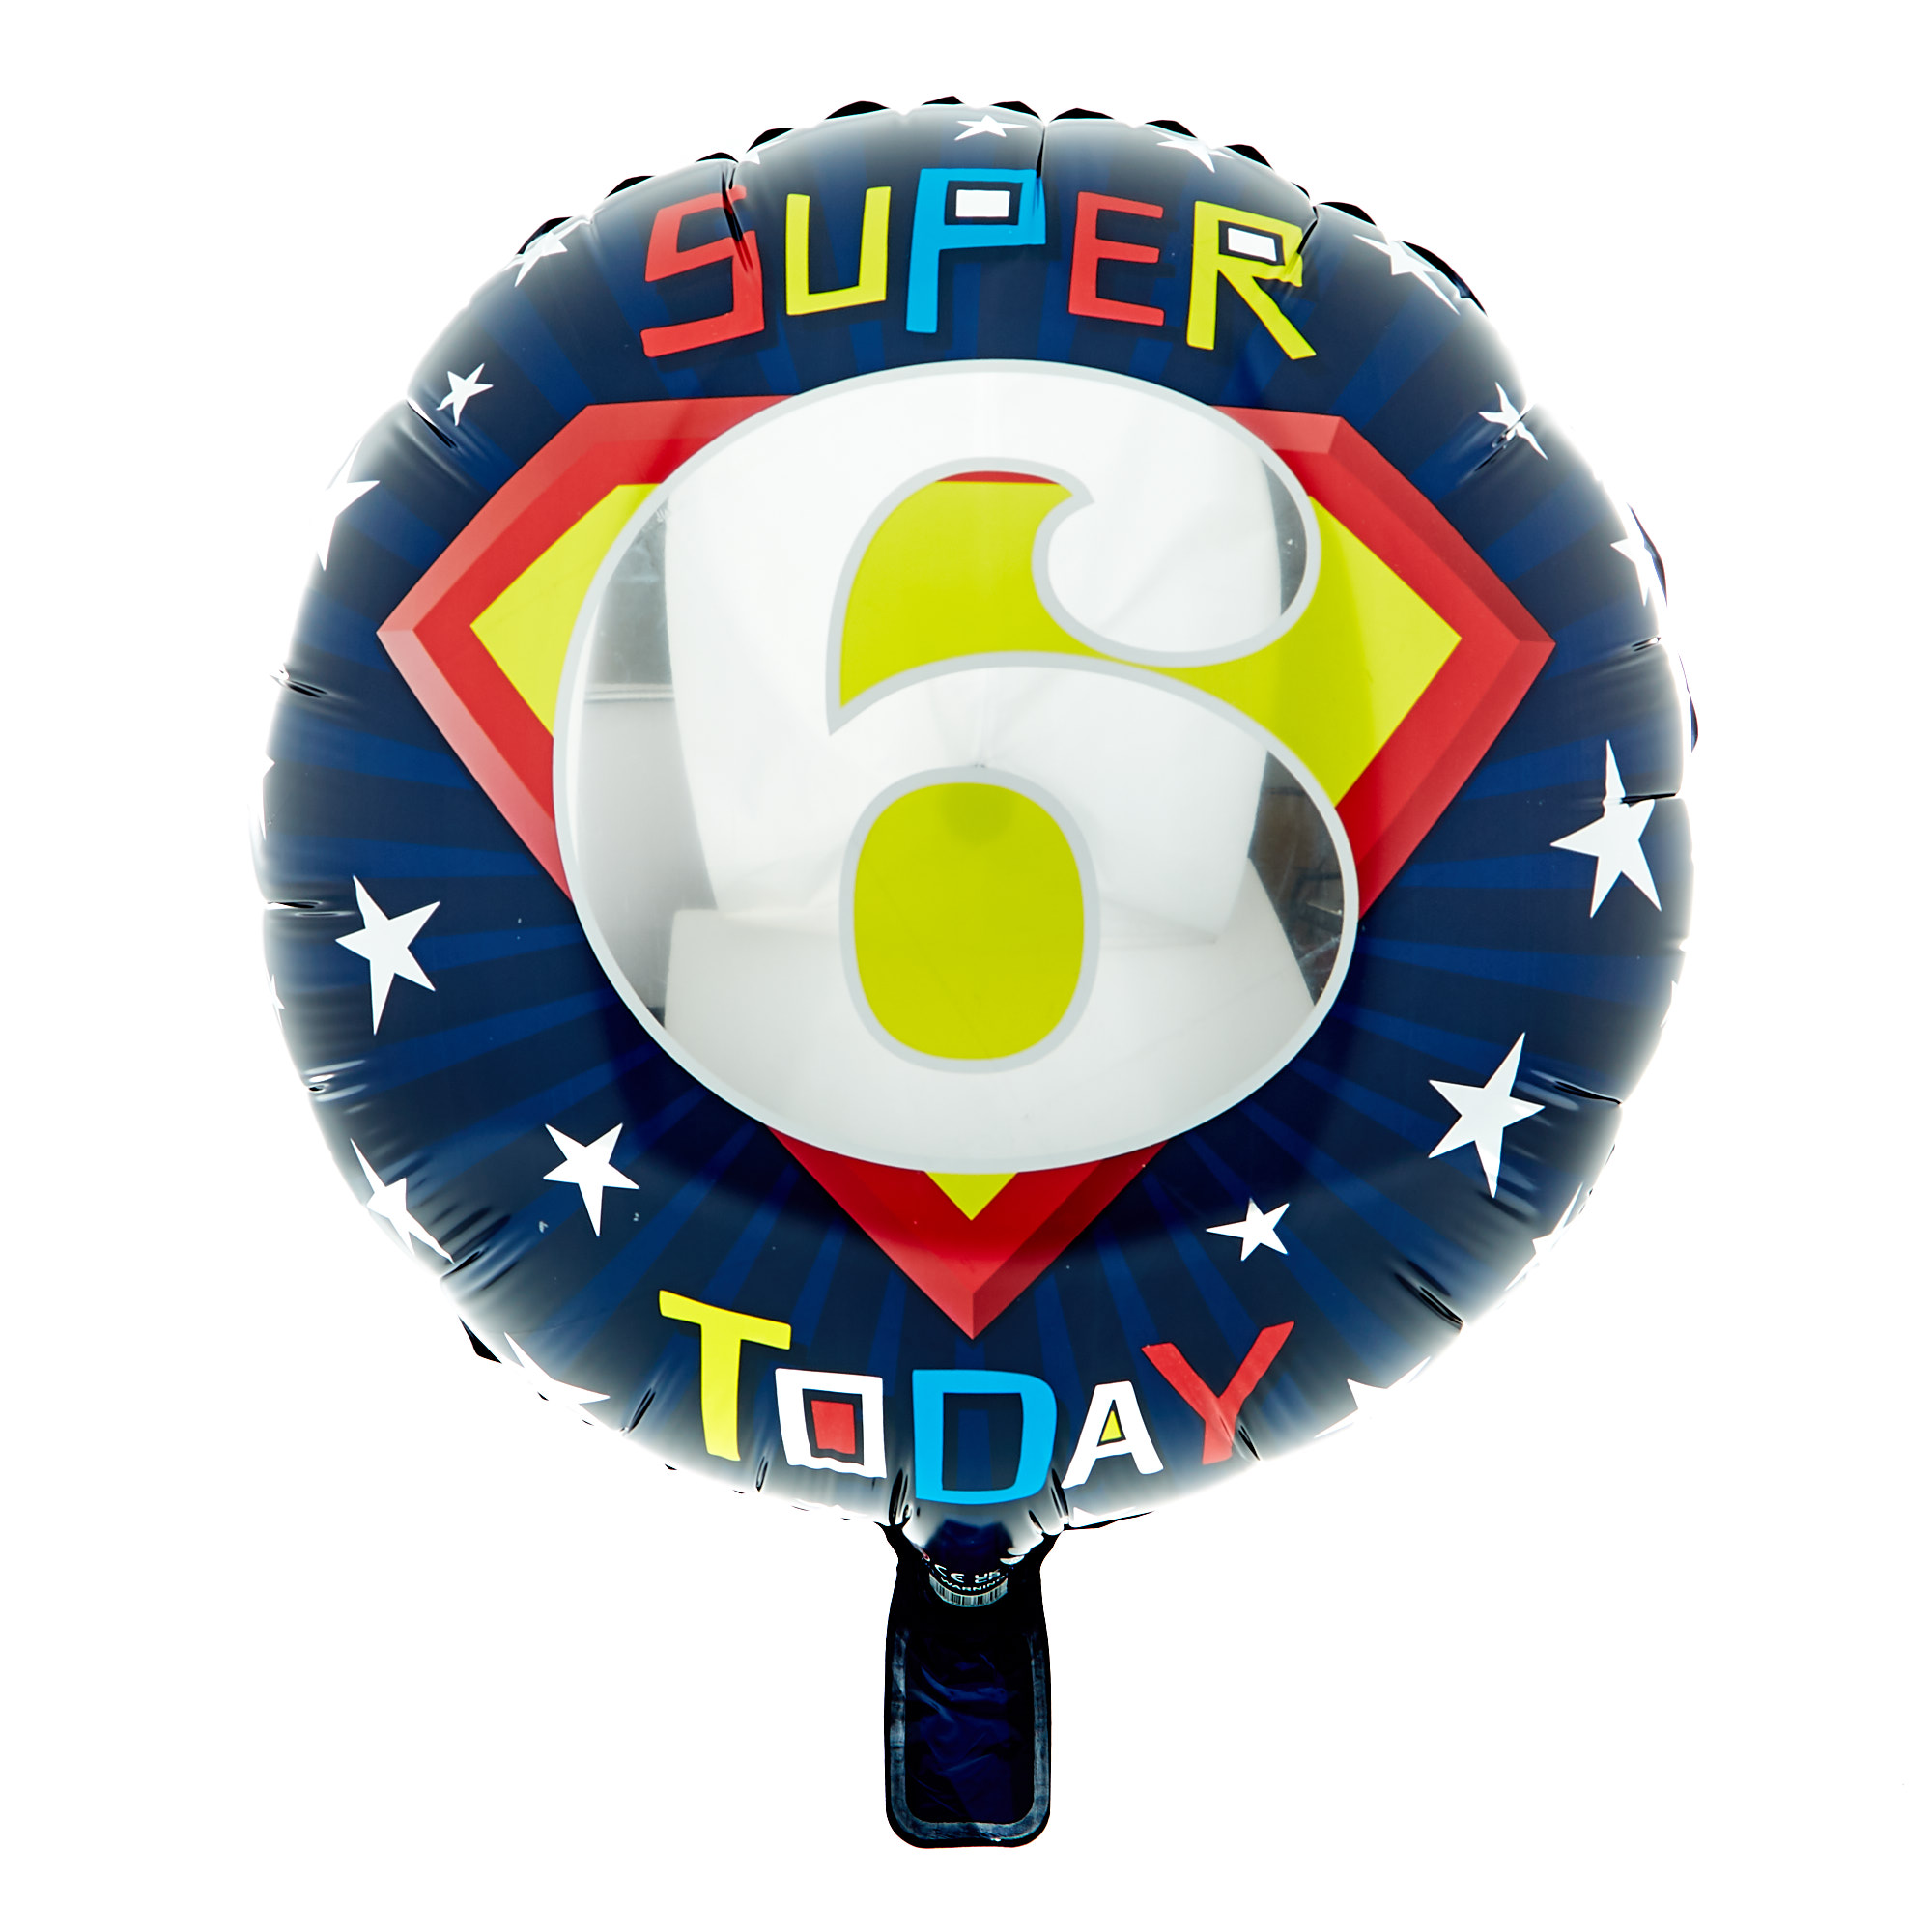 18-Inch Super 6 Today Foil Helium Balloon